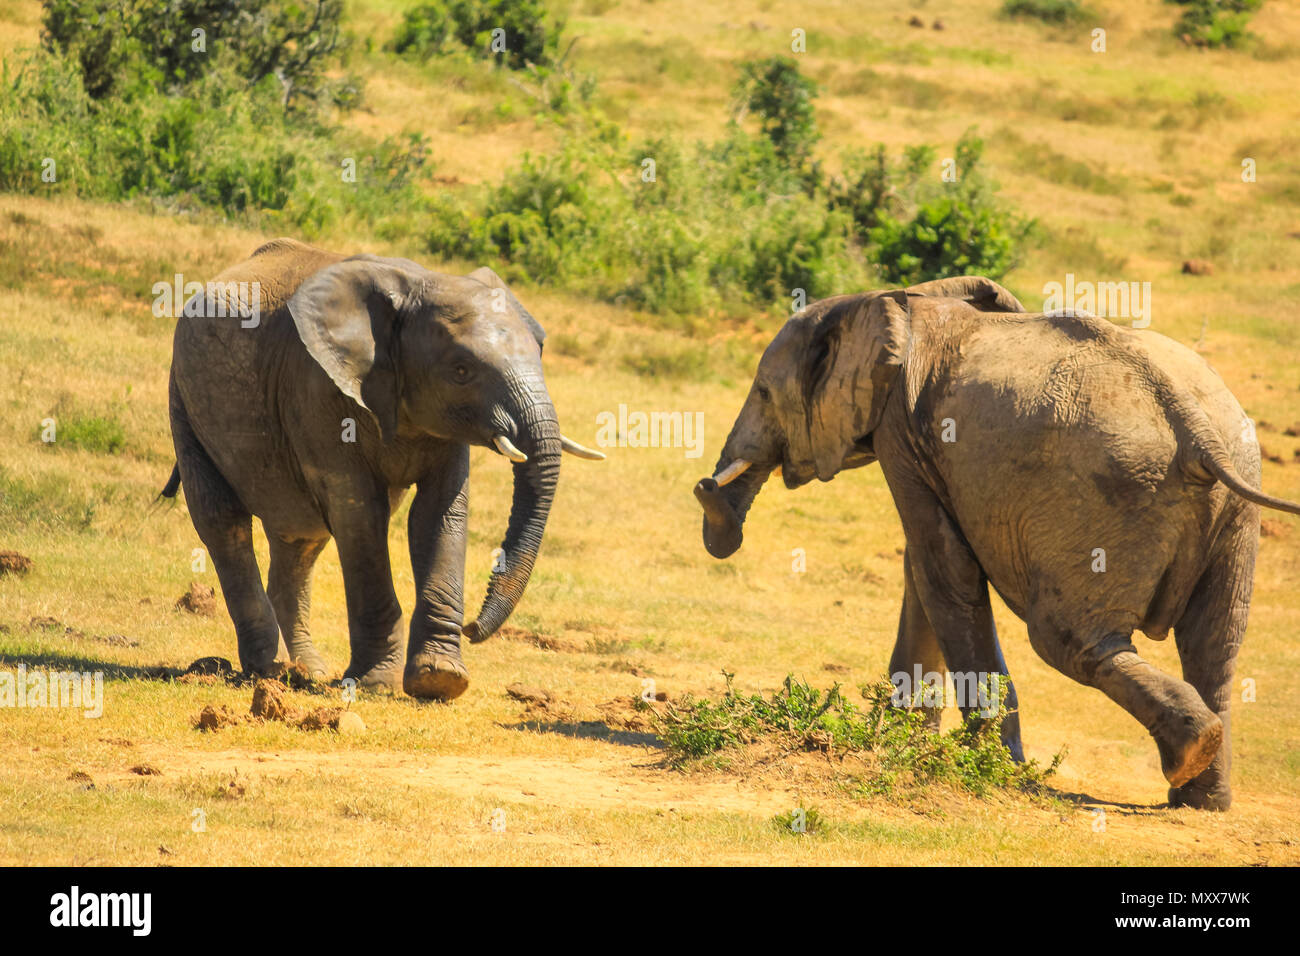 Two young African Elephants run towards each other in the savannah of Addo Elephant National Park, a popular tourist destination for elephant safaris. Eastern Cape, South Africa. Stock Photo